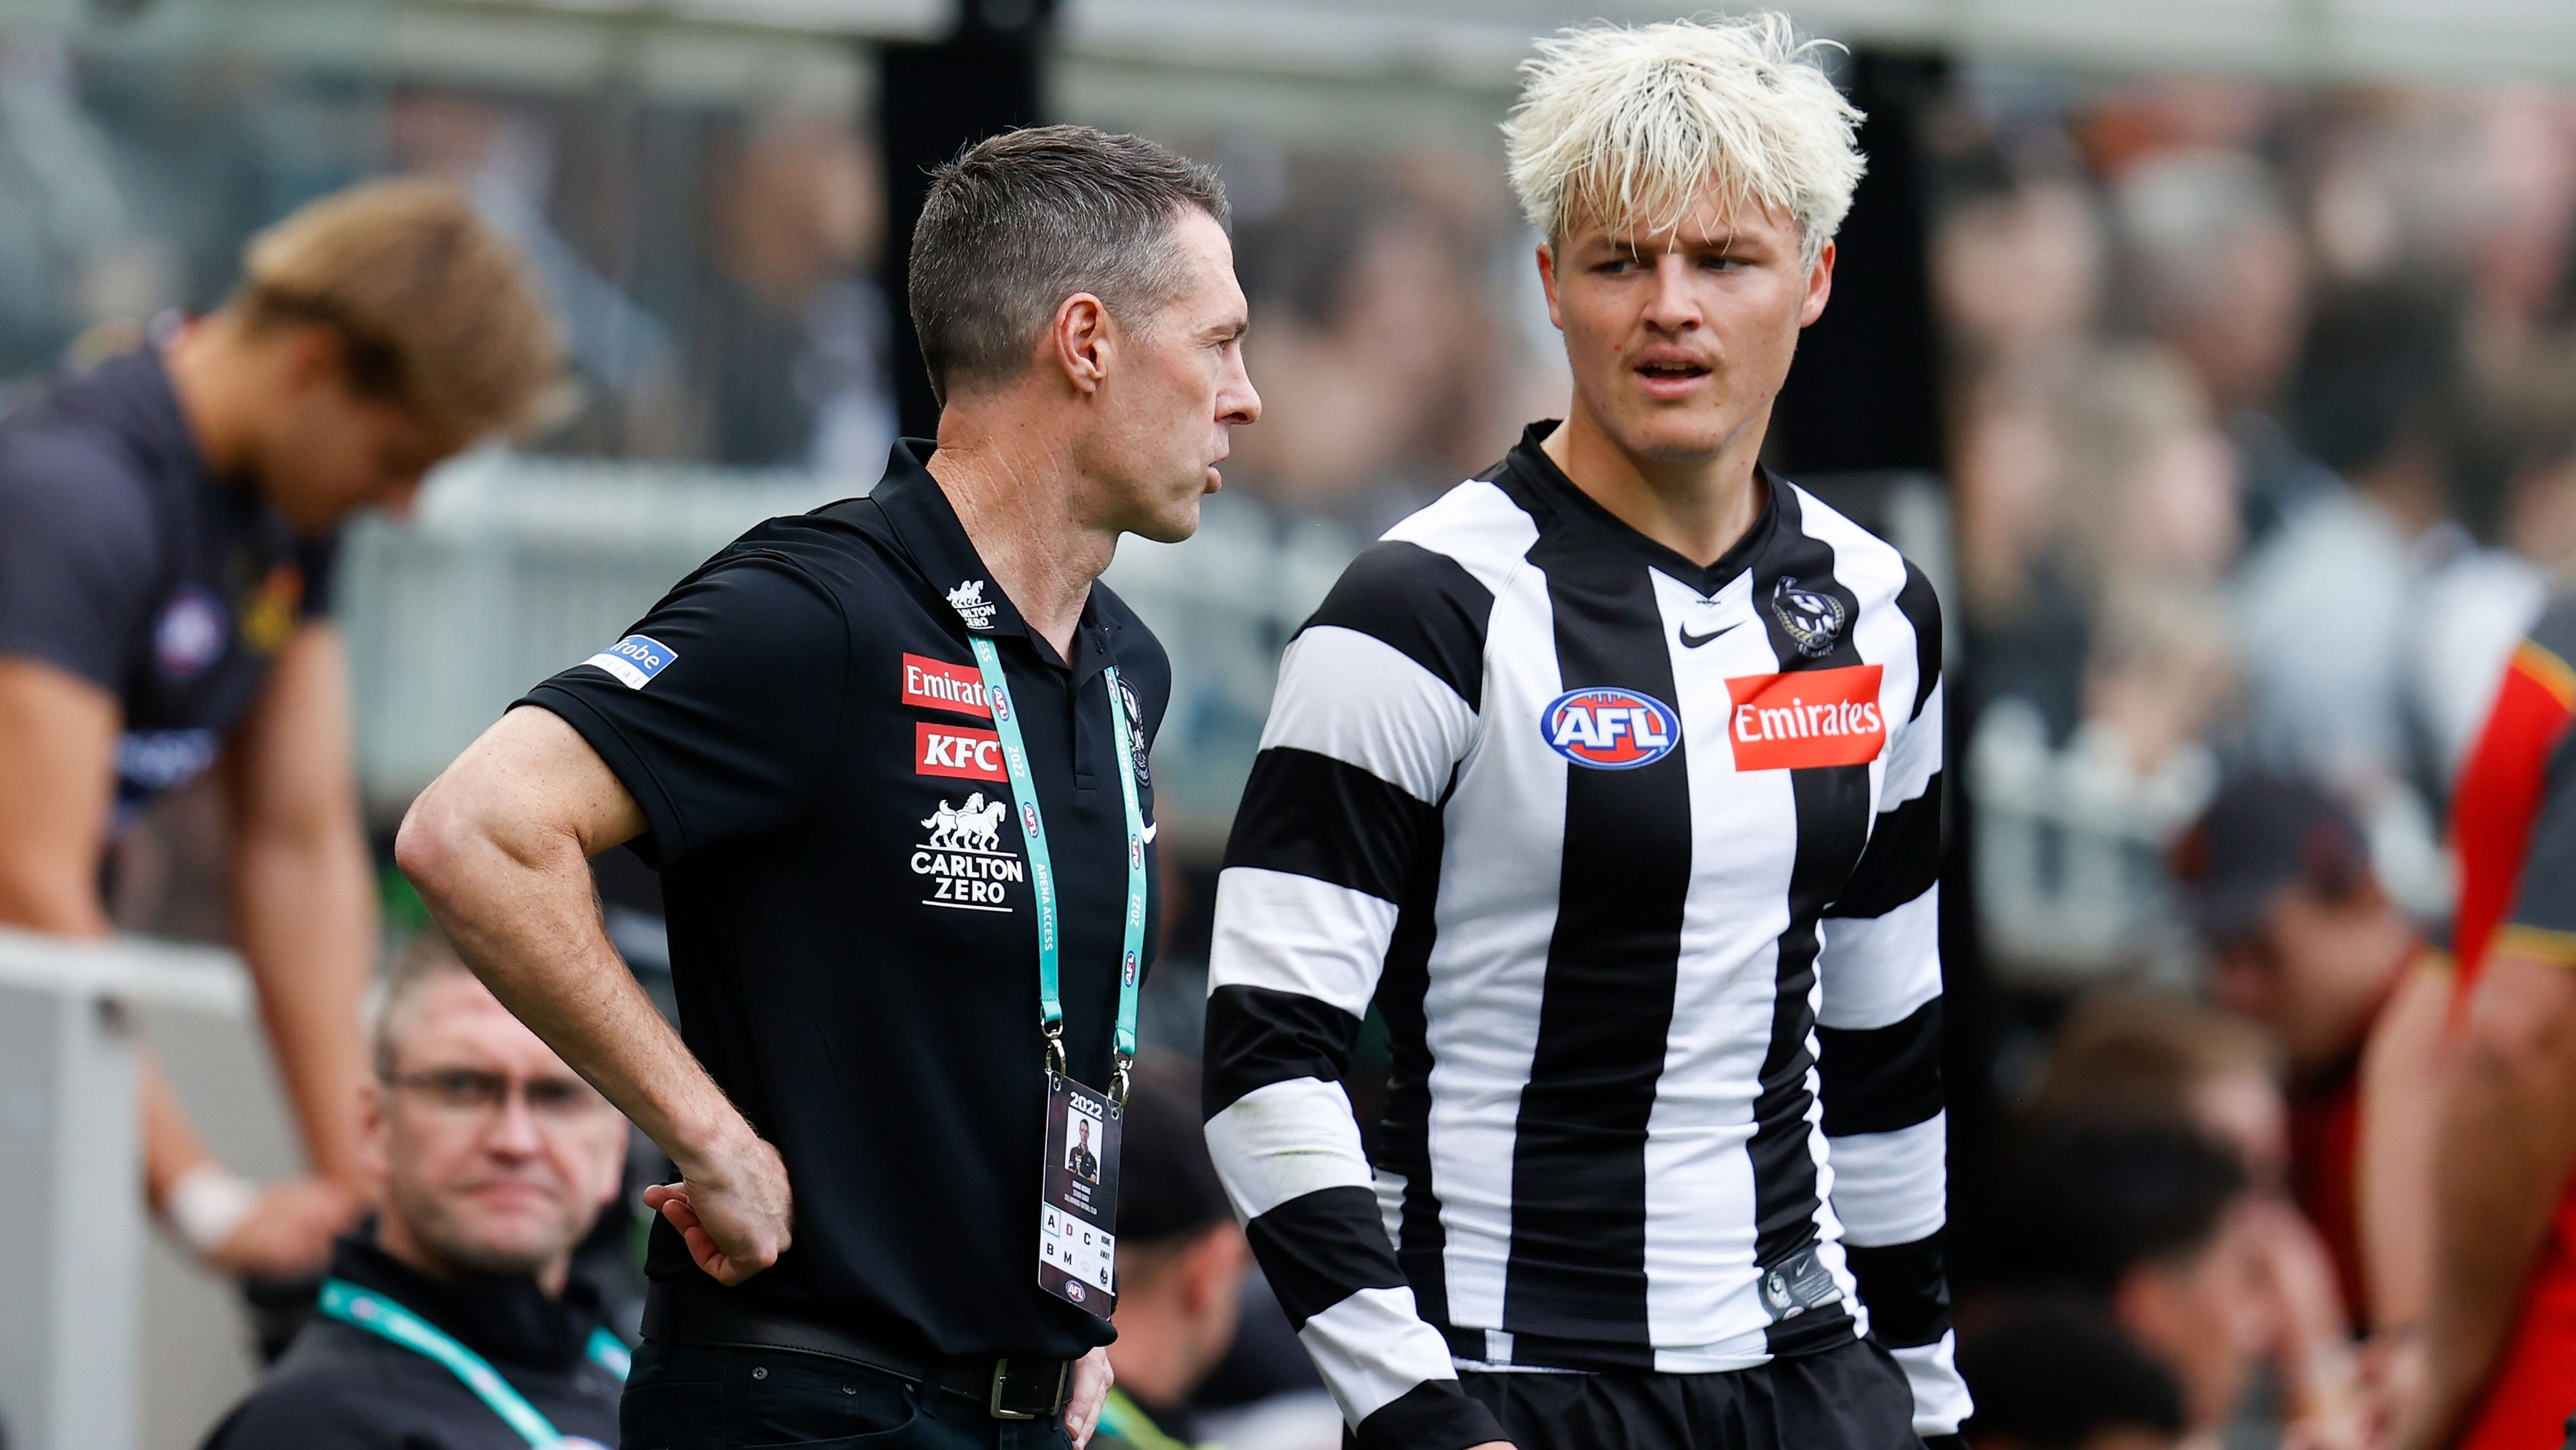 Craig McRae shut down suggestions that Ginnivan was shunned from the Pies.